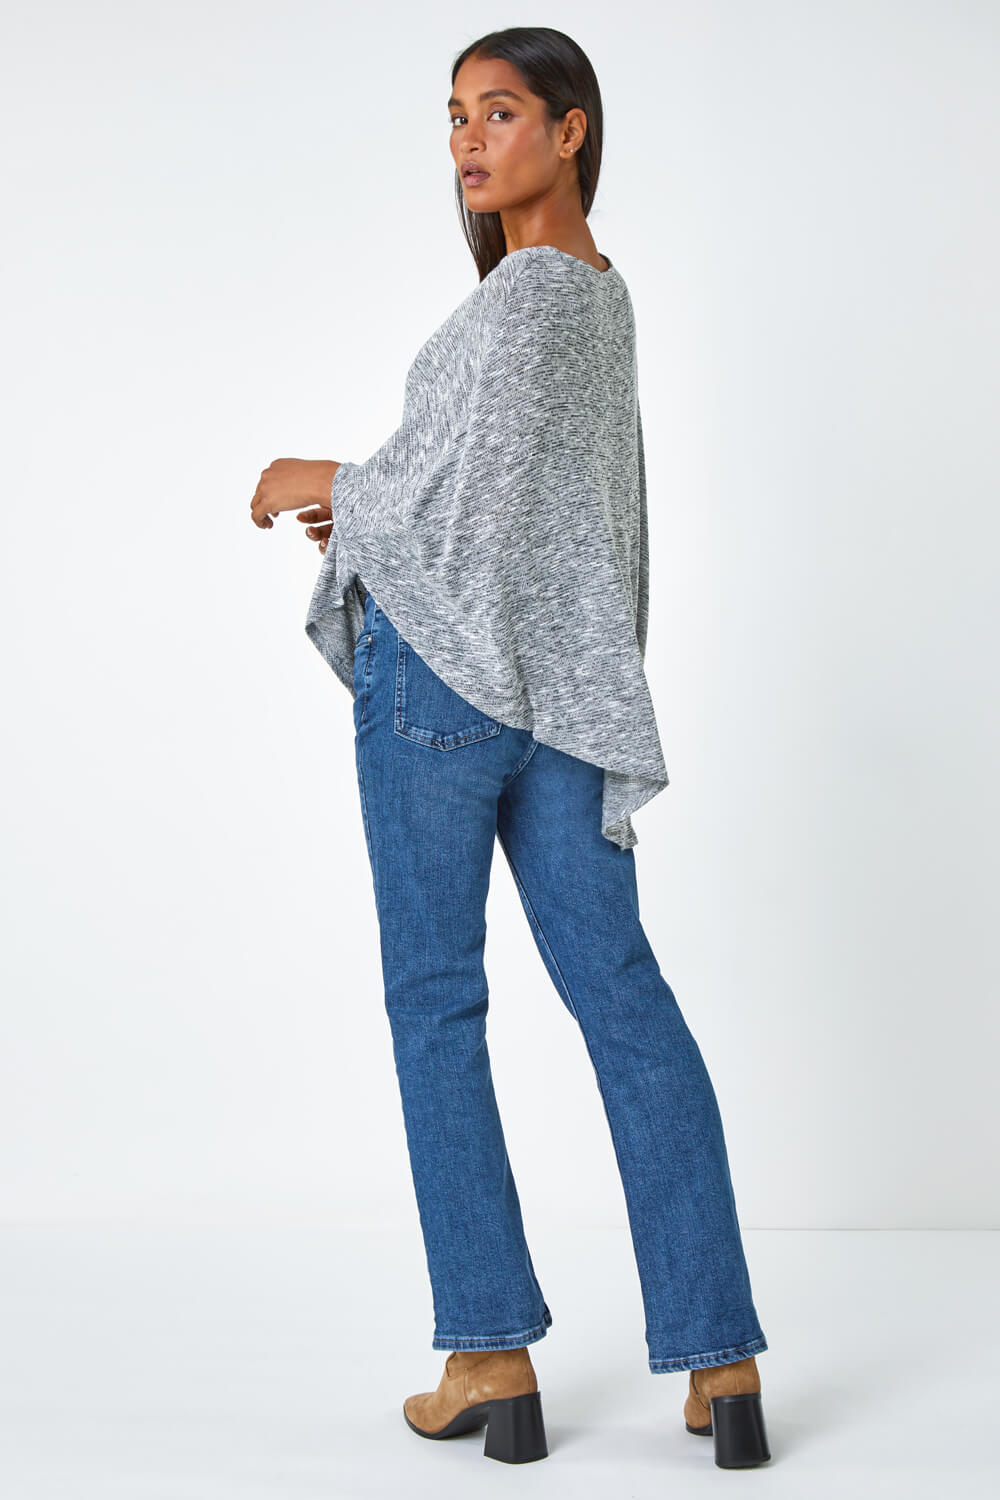 Grey Marl Stretch Knit Jersey Top, Image 3 of 5